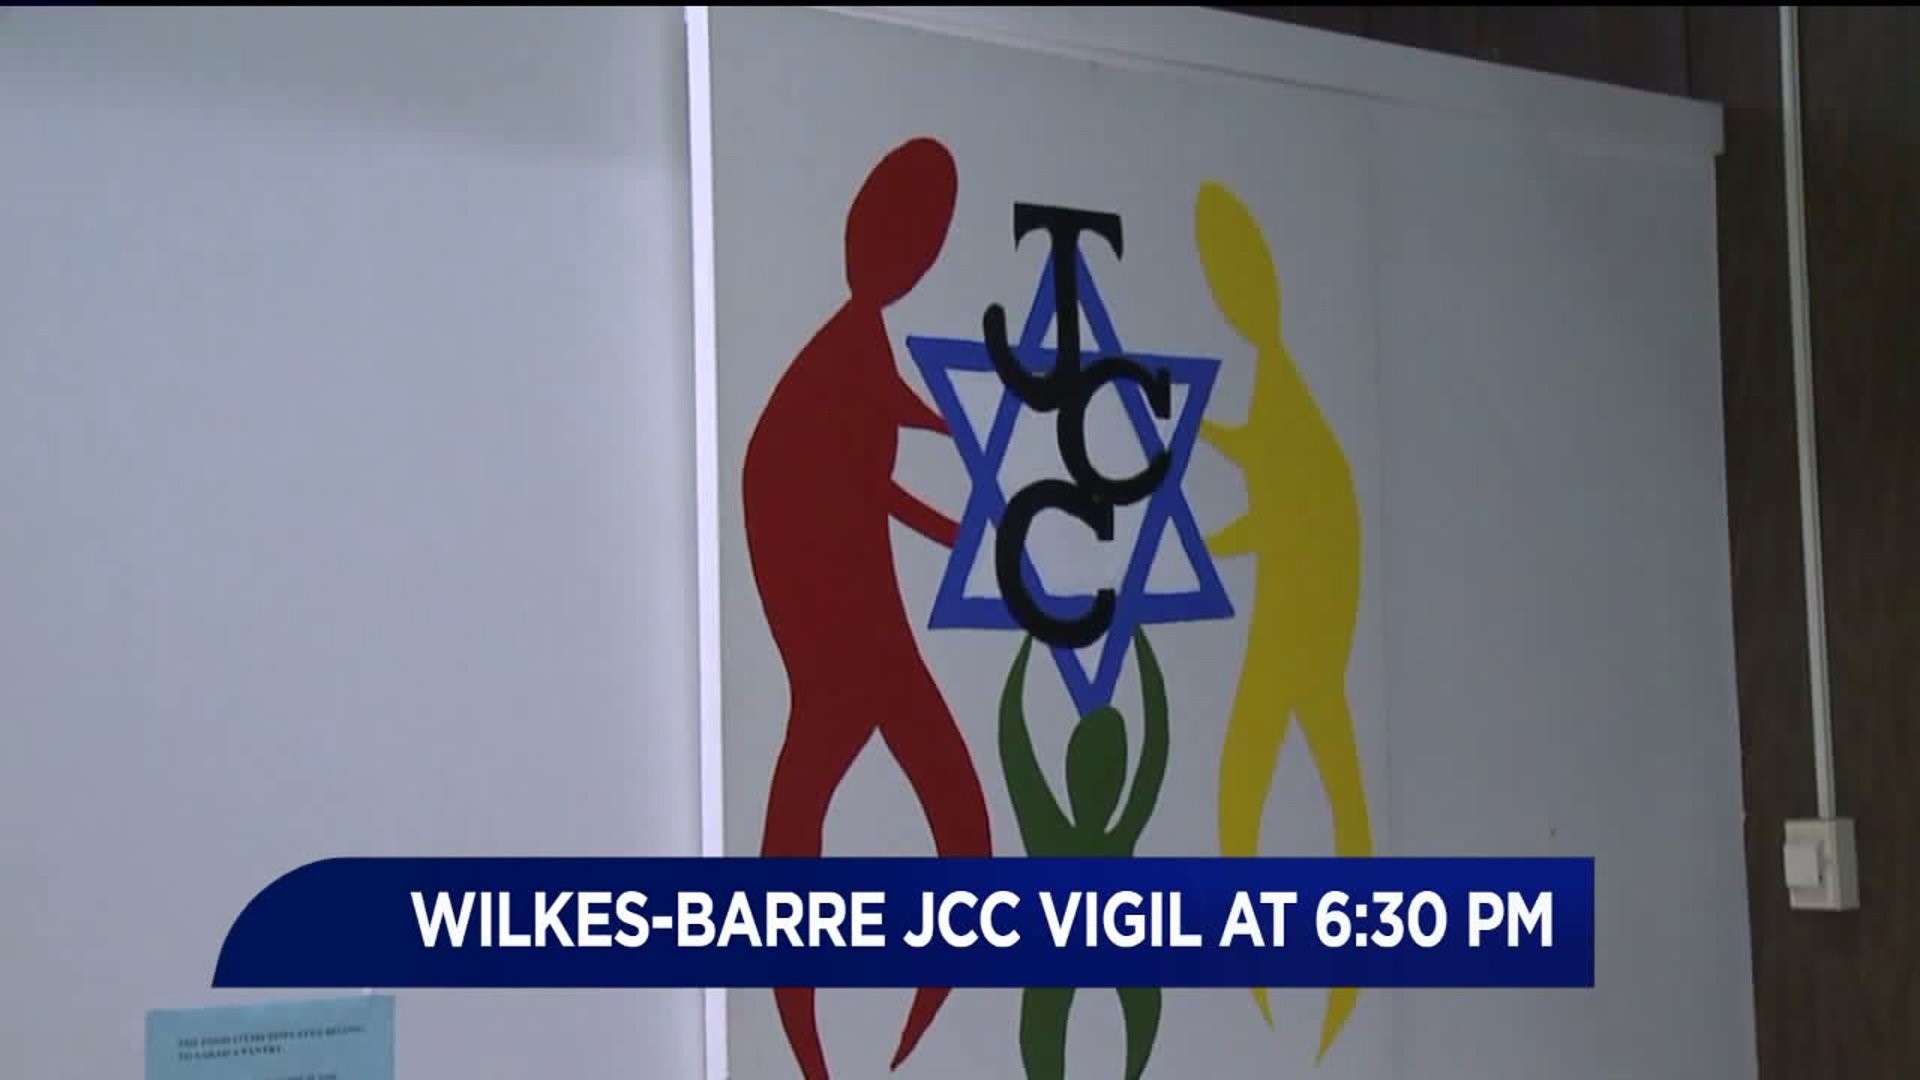 Vigil for Pittsburgh Victims at JCC in Wilkes-Barre